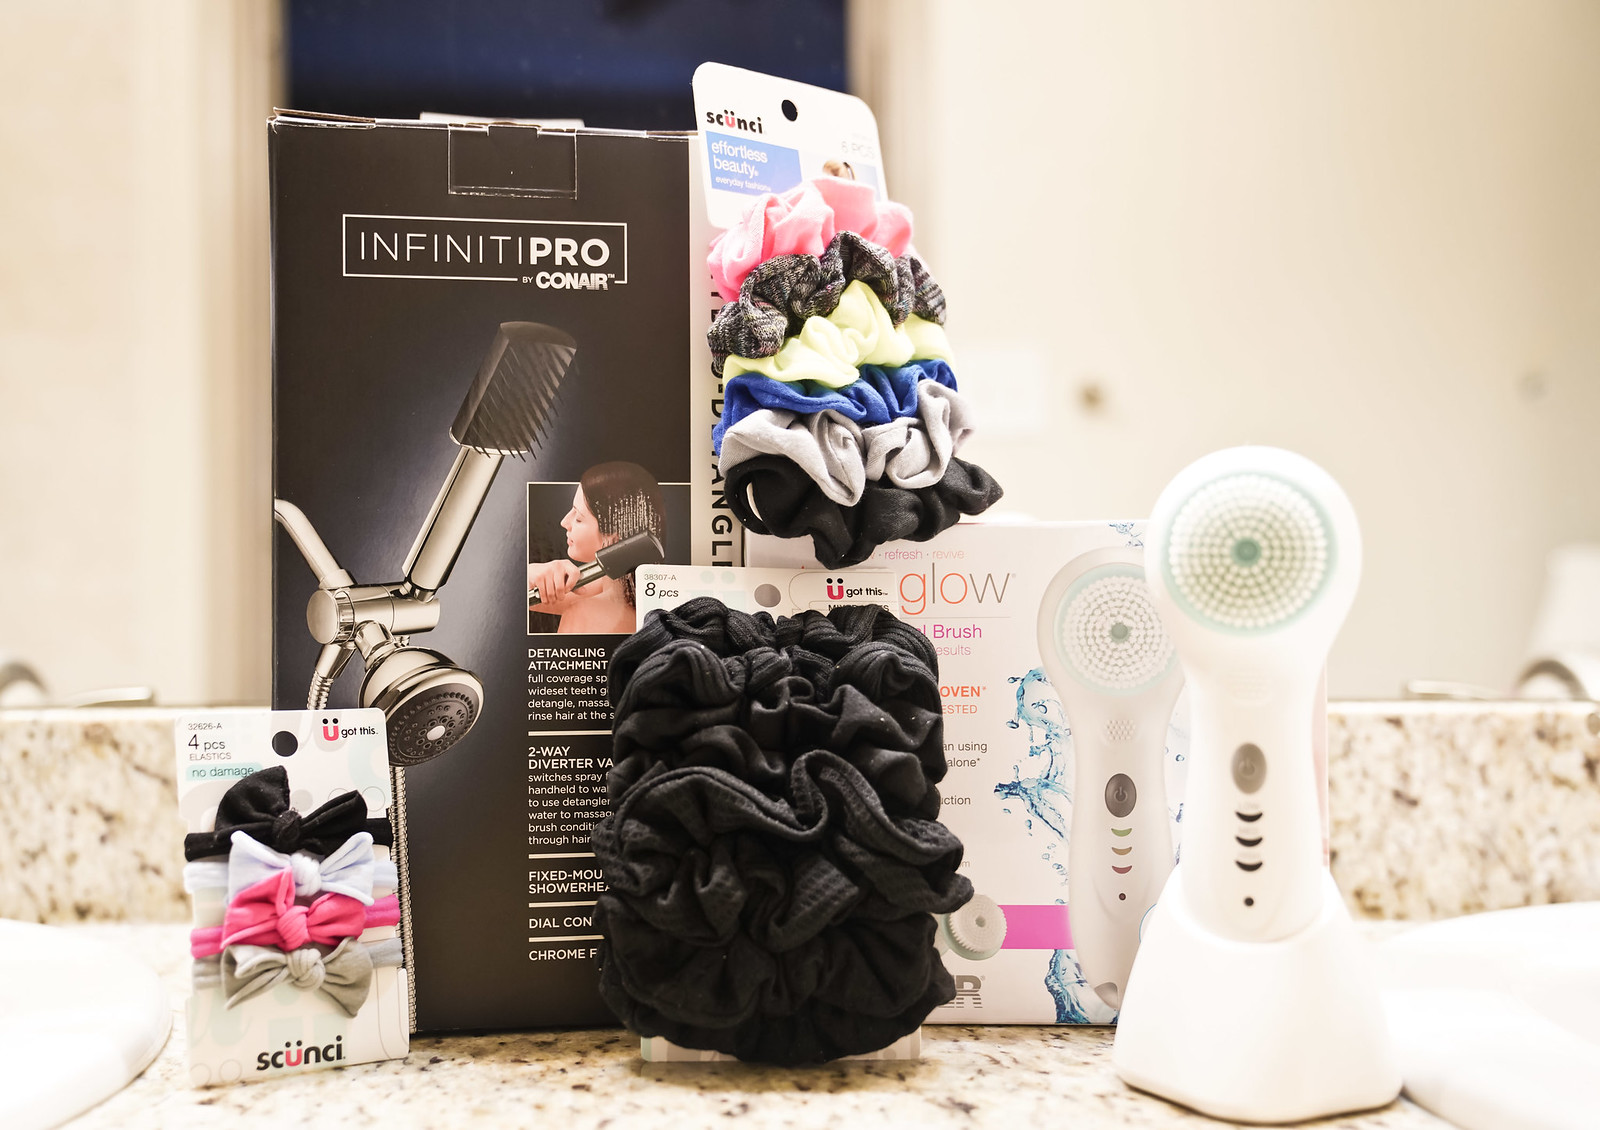 using conair products to get ready for the holidays, candace hampton